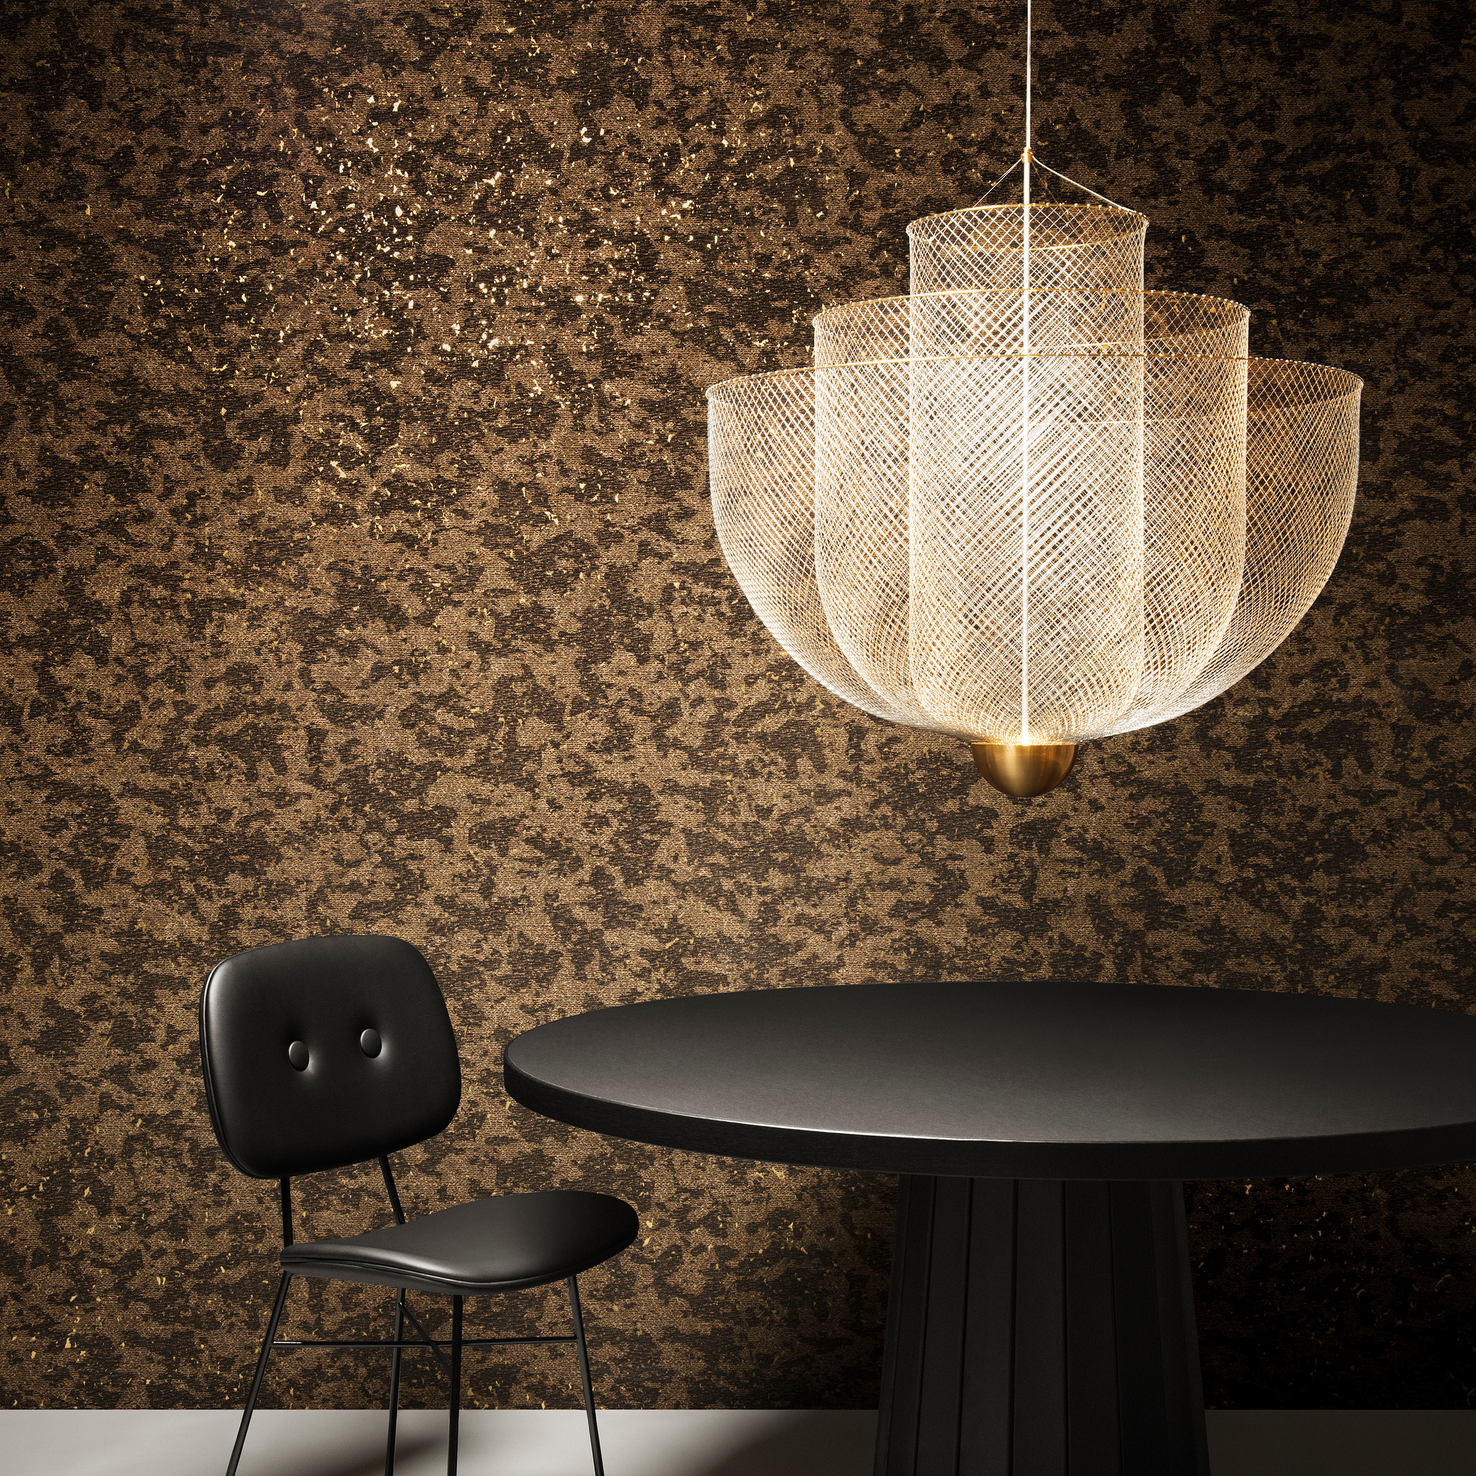 Poetic composition Meshmatics Chandelier, Container Table, The Golden Chair and Moooi Wallcovering